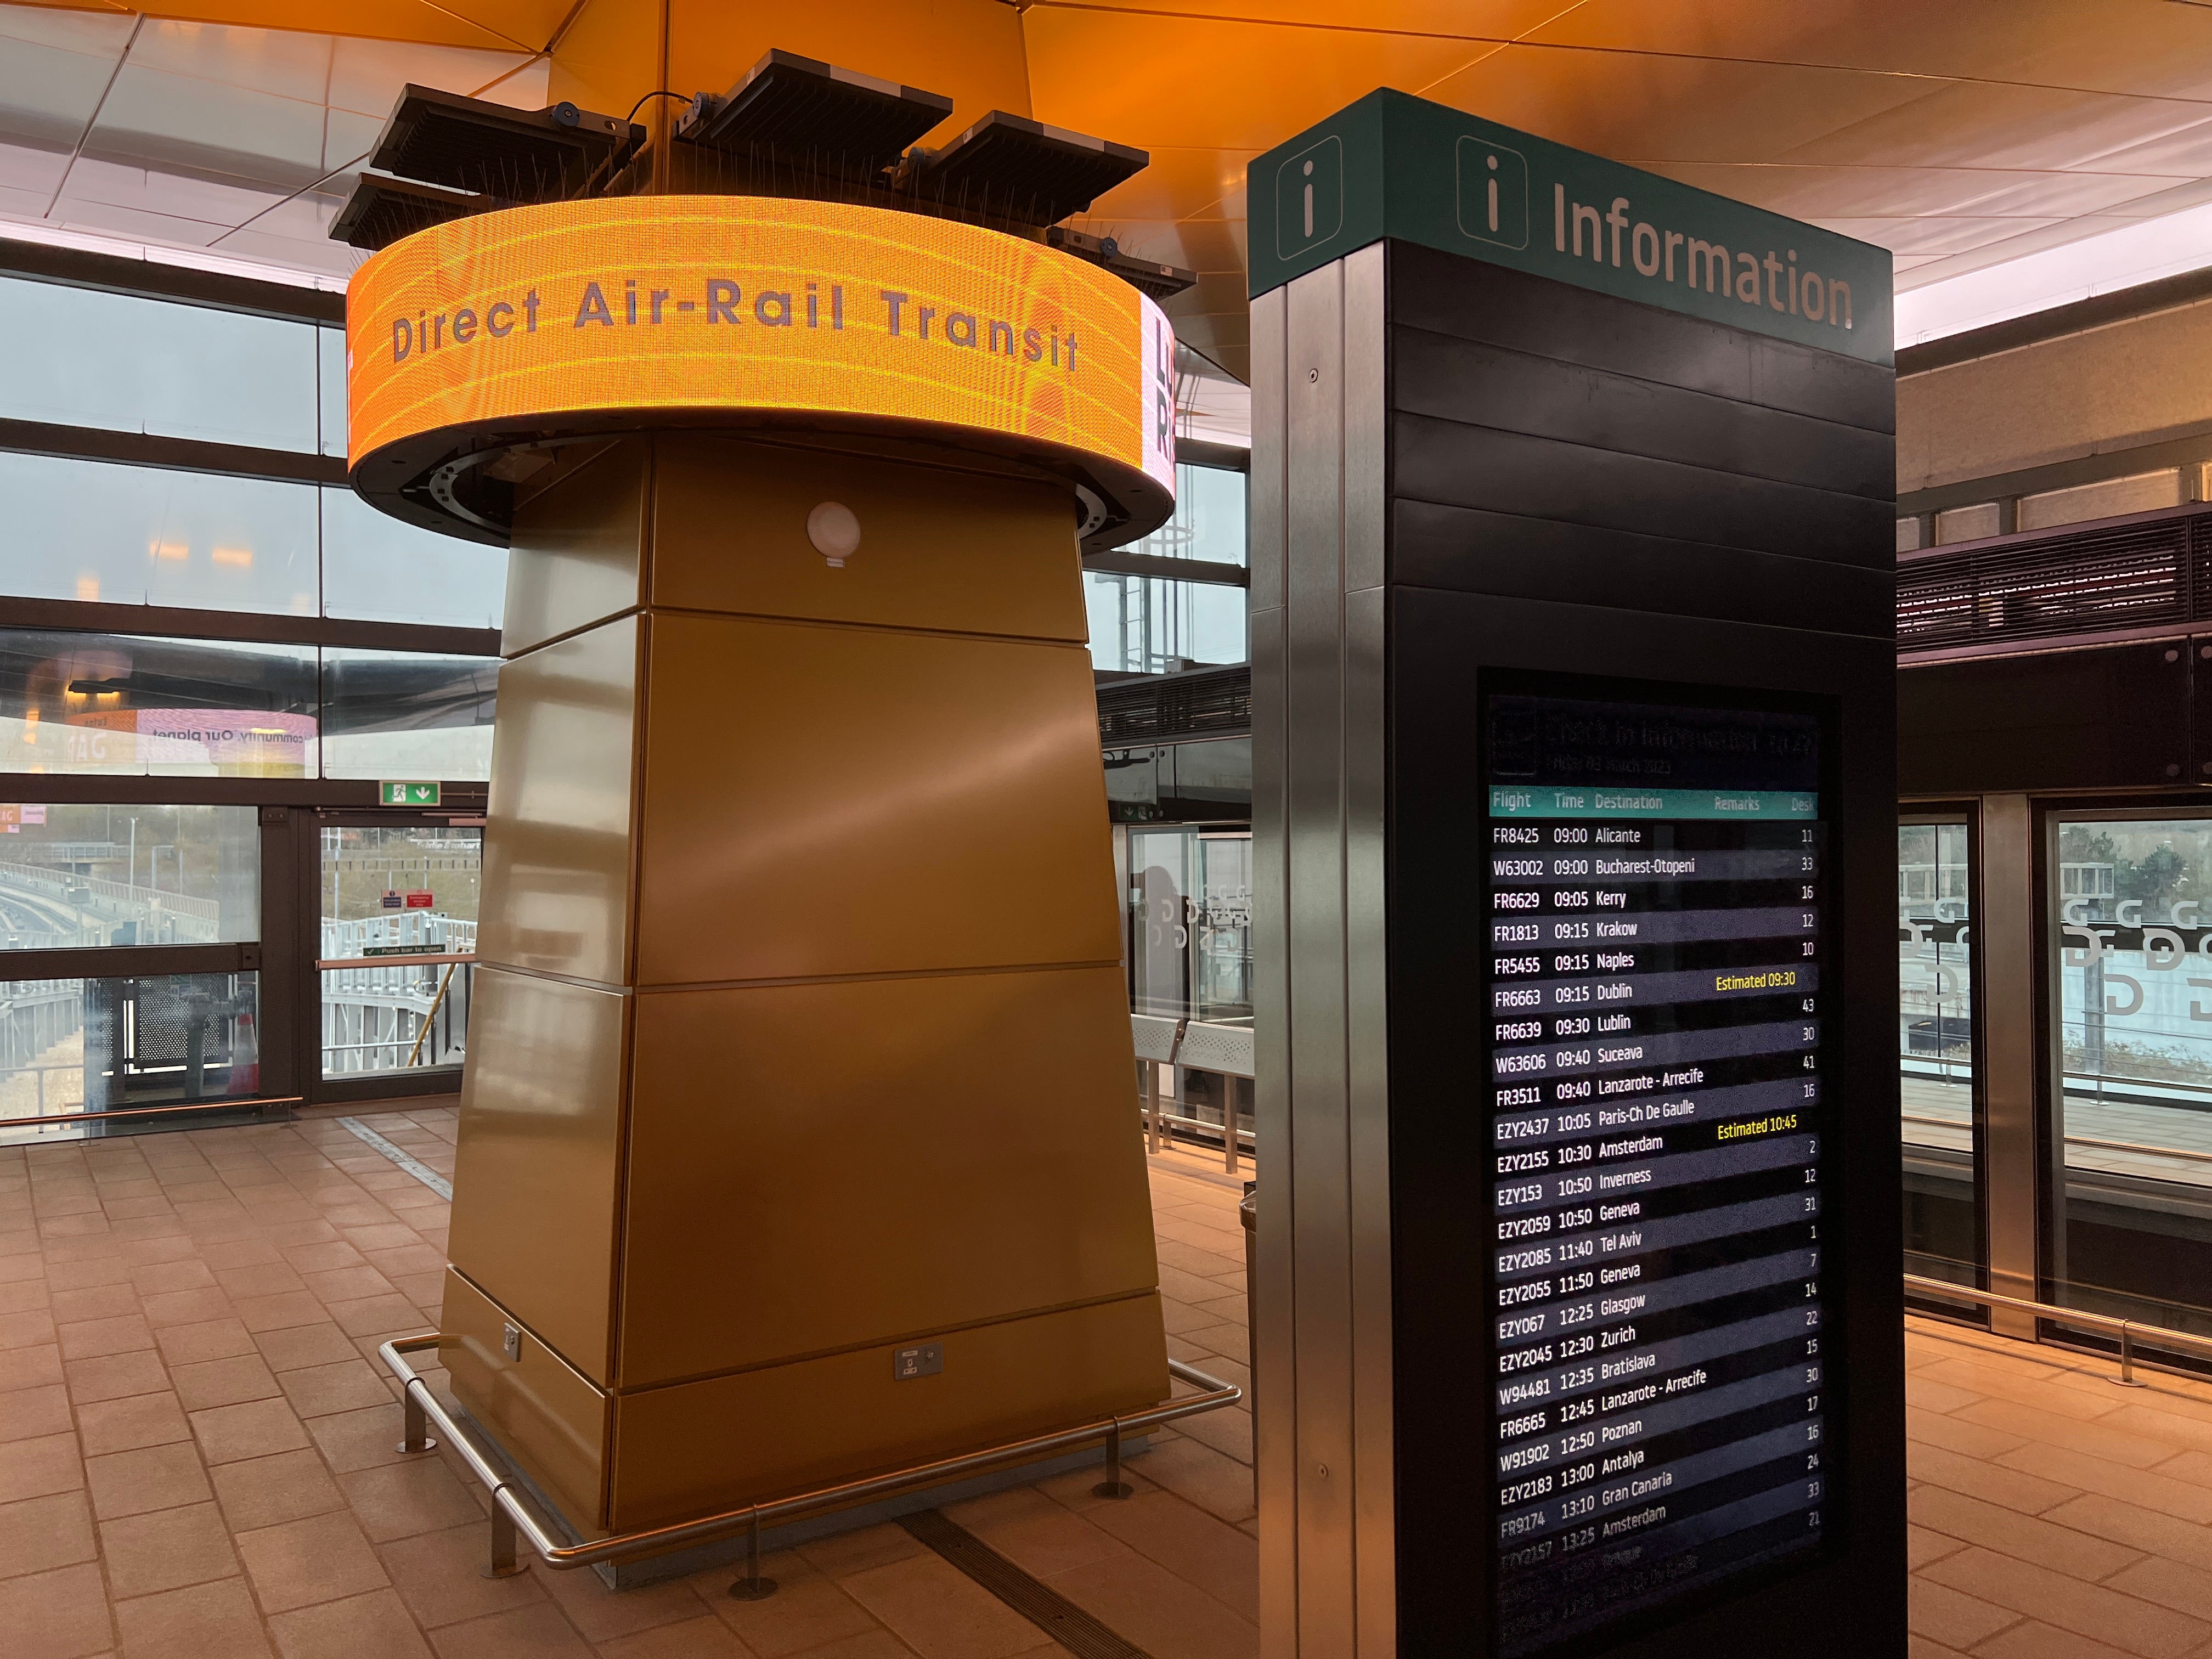 Dart start: The Direct Air-Rail Transit at Luton airport is due to open to passengers on 10 March